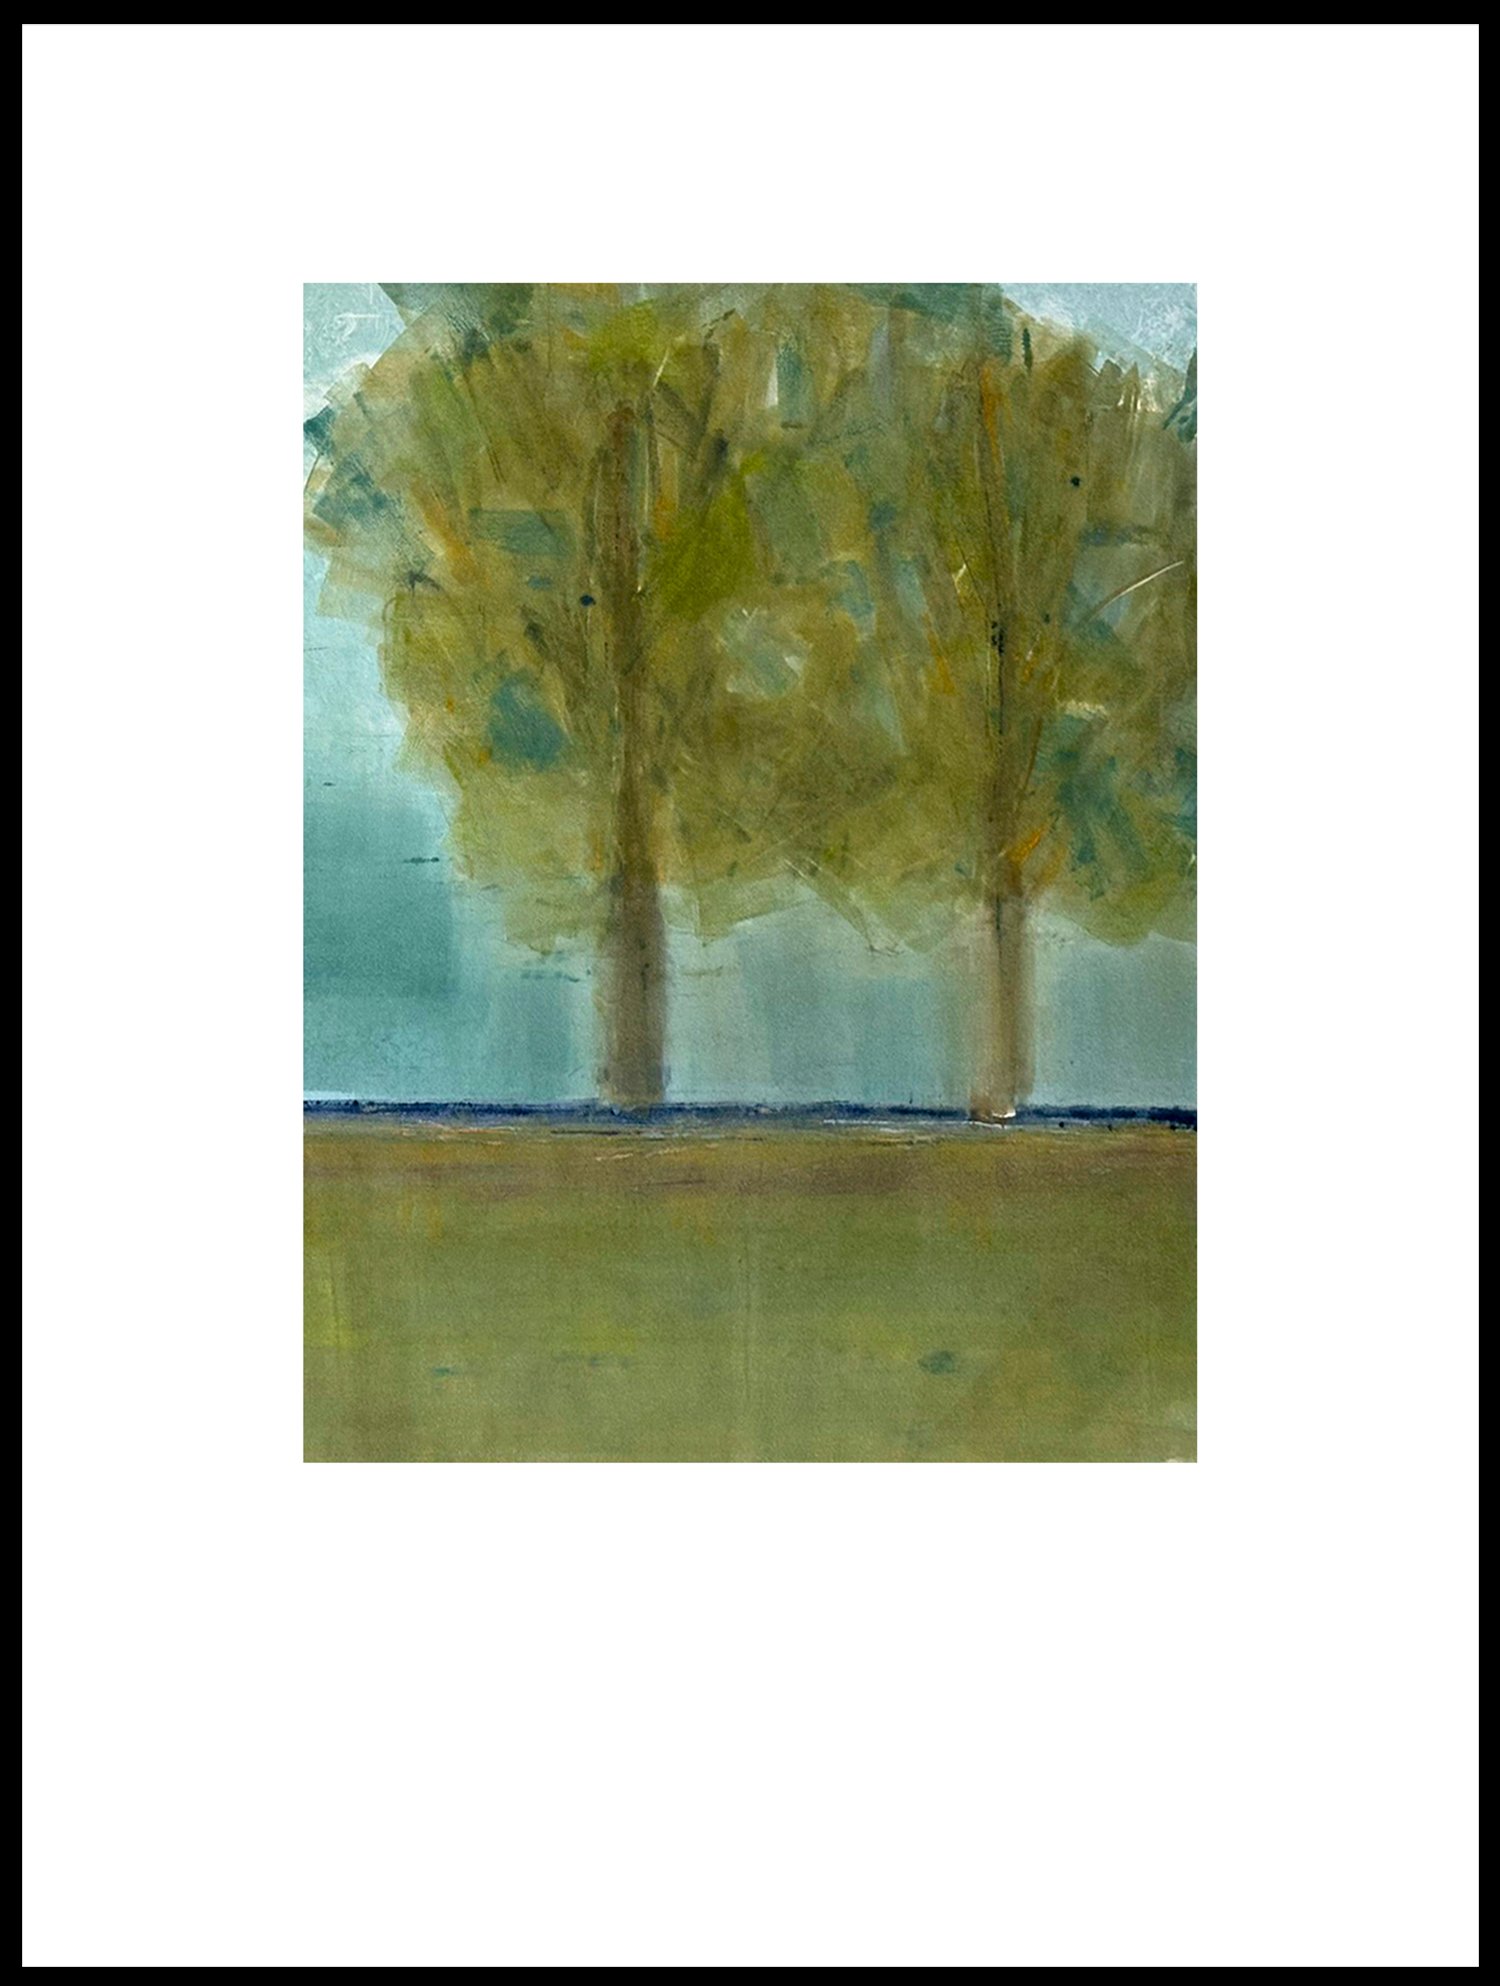   "Side by Side"  (image size 12.5 x 9.25”,   presented in slim gold metal frame 24 x 18”x 12.75”) whispers of nature's harmony capturing the quiet beauty of the natural world. Unfolding like a nature haiku in muted tones two slender green sentinels 